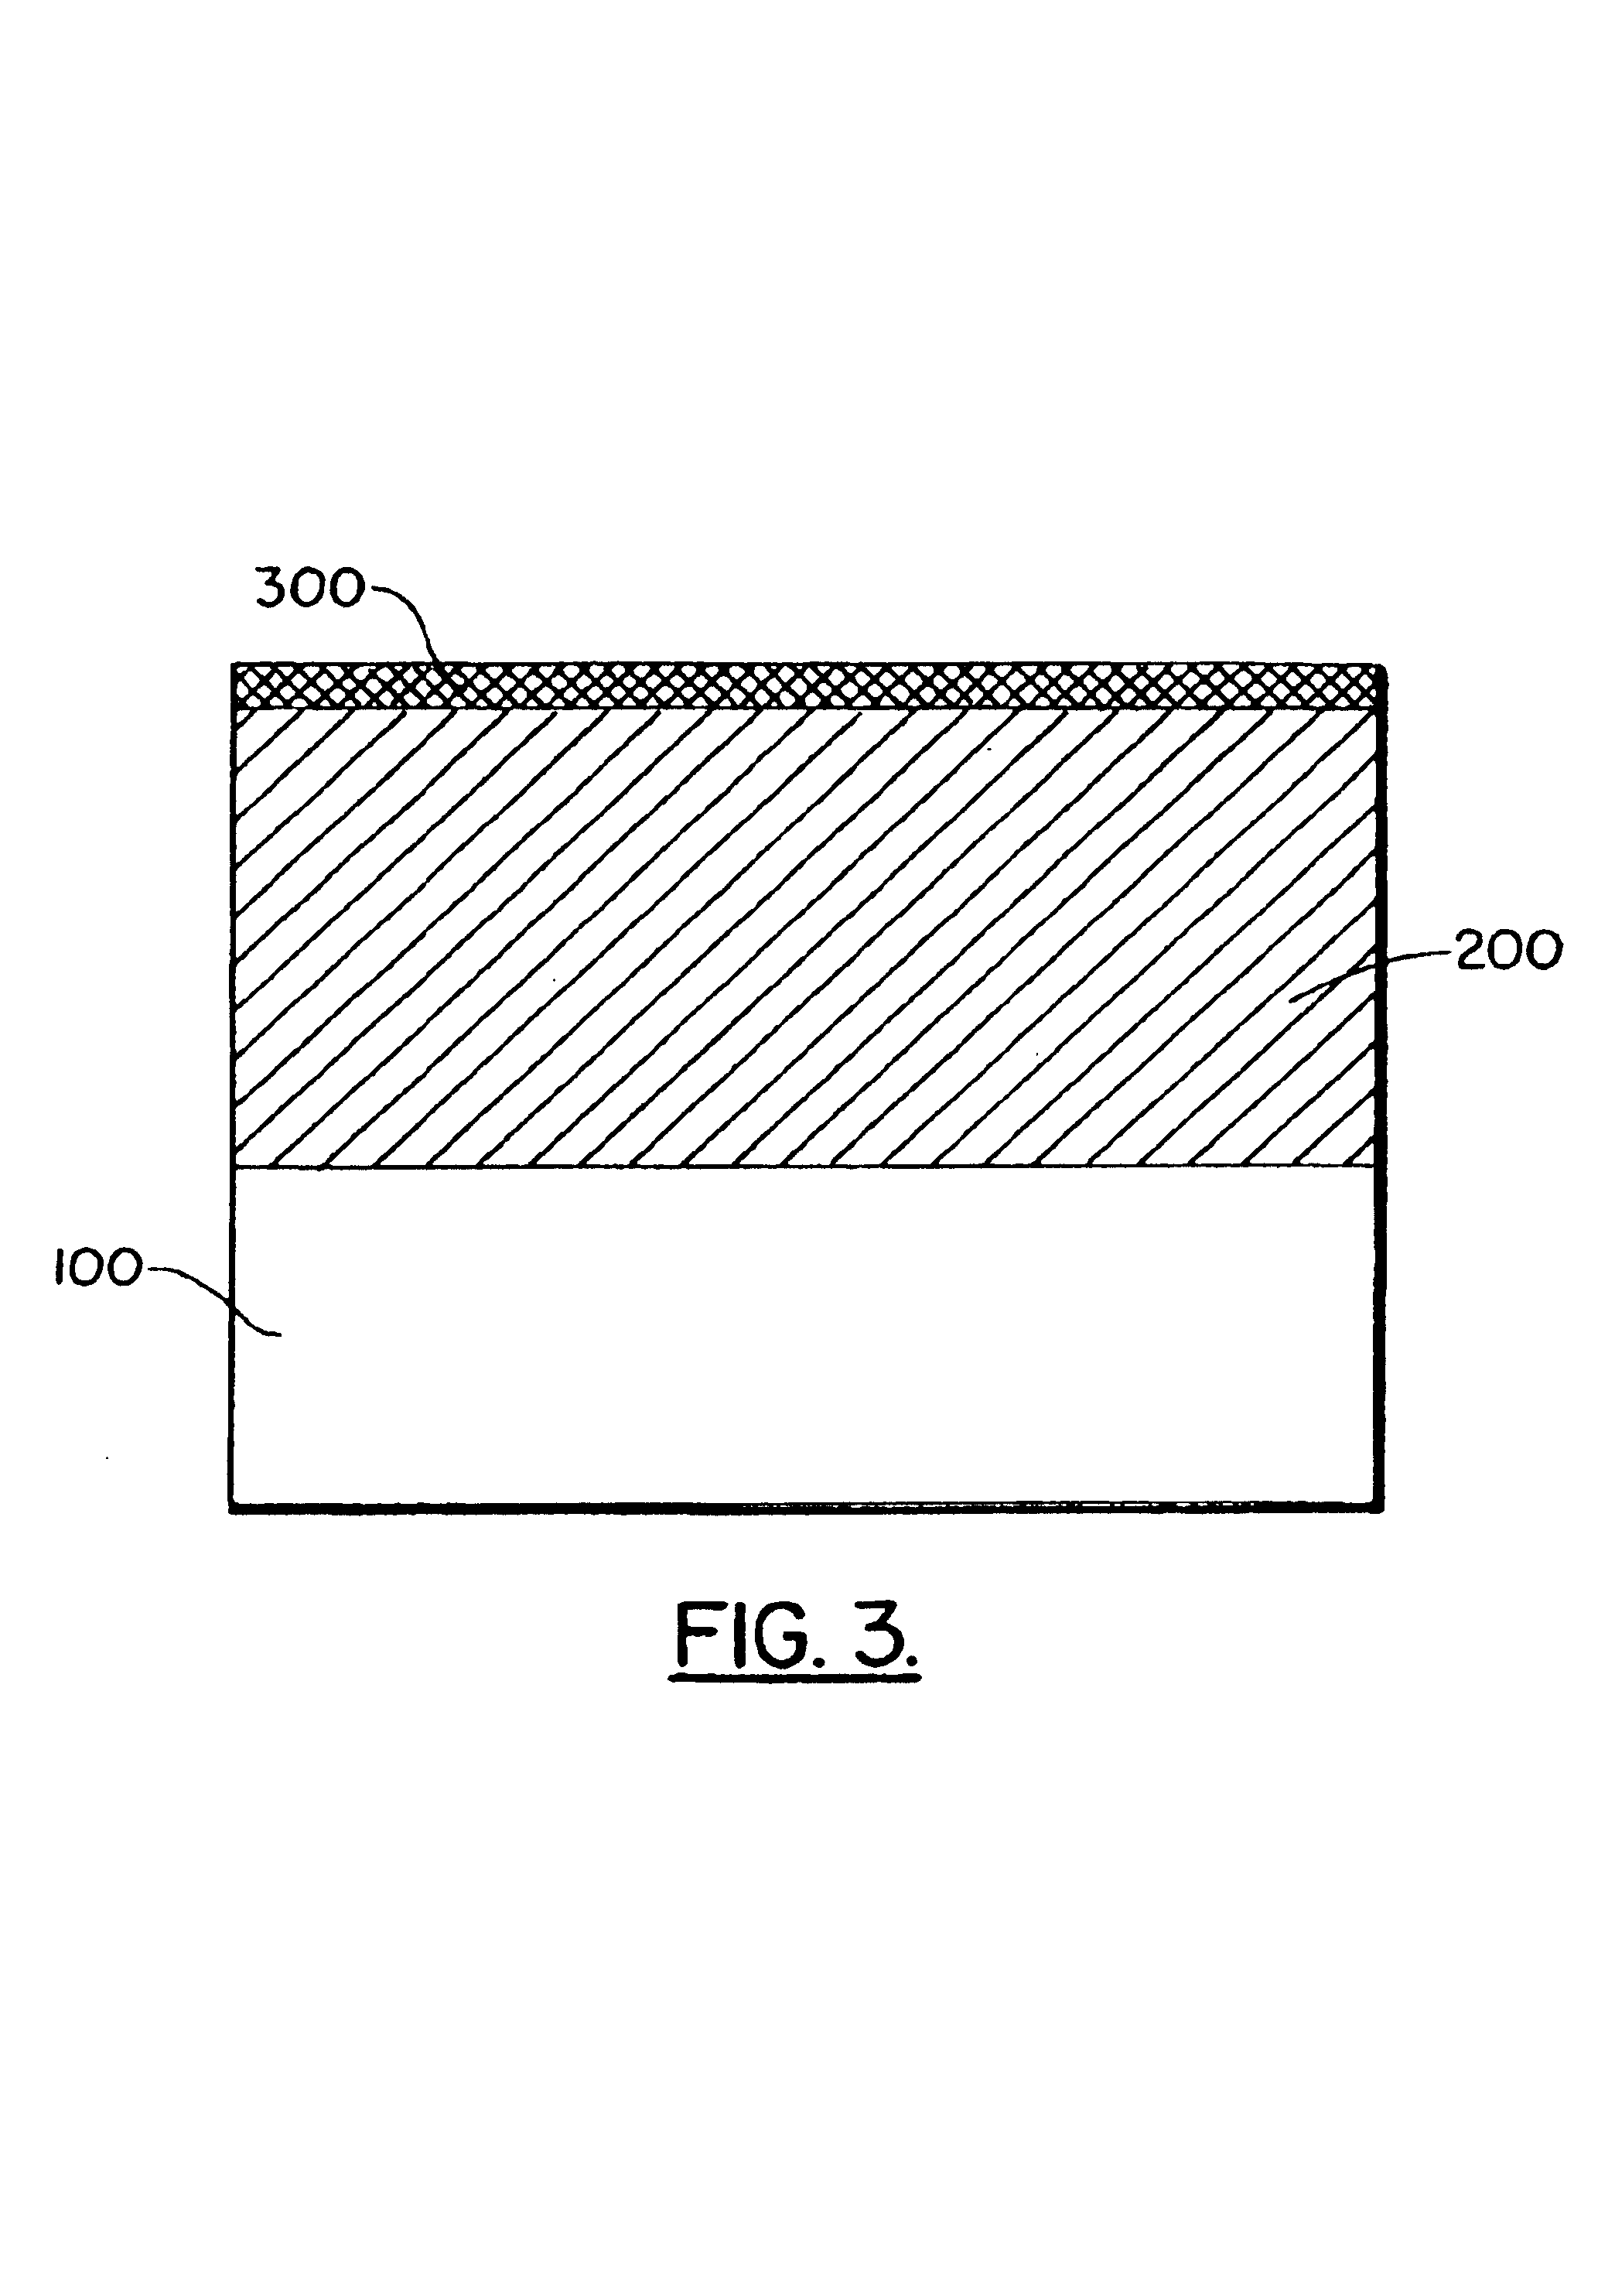 Process and device for forming ceramic coatings on metals and alloys, and coatings produced by this process